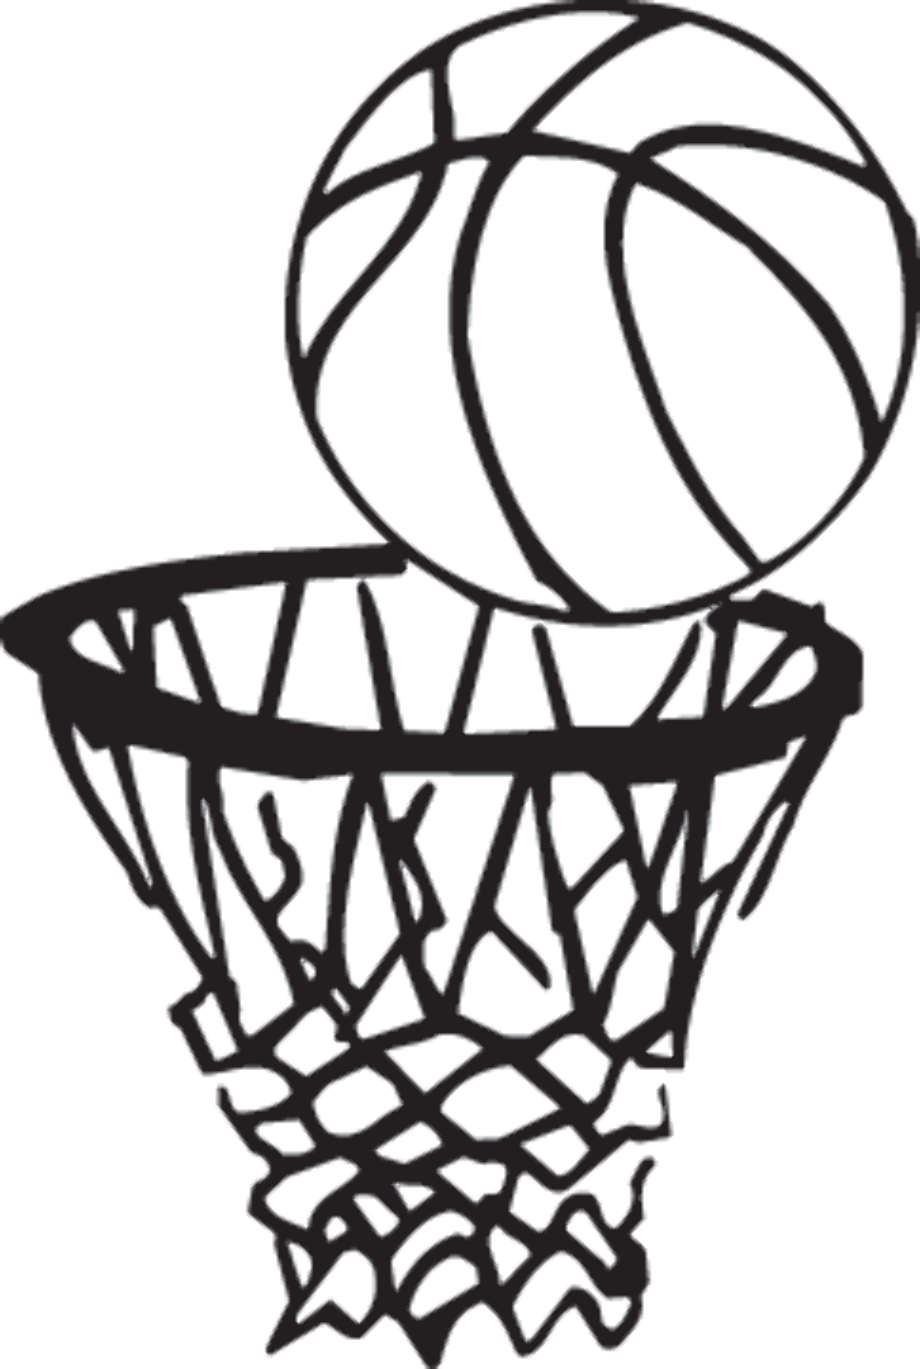 Download High Quality basketball clipart black and white swoosh